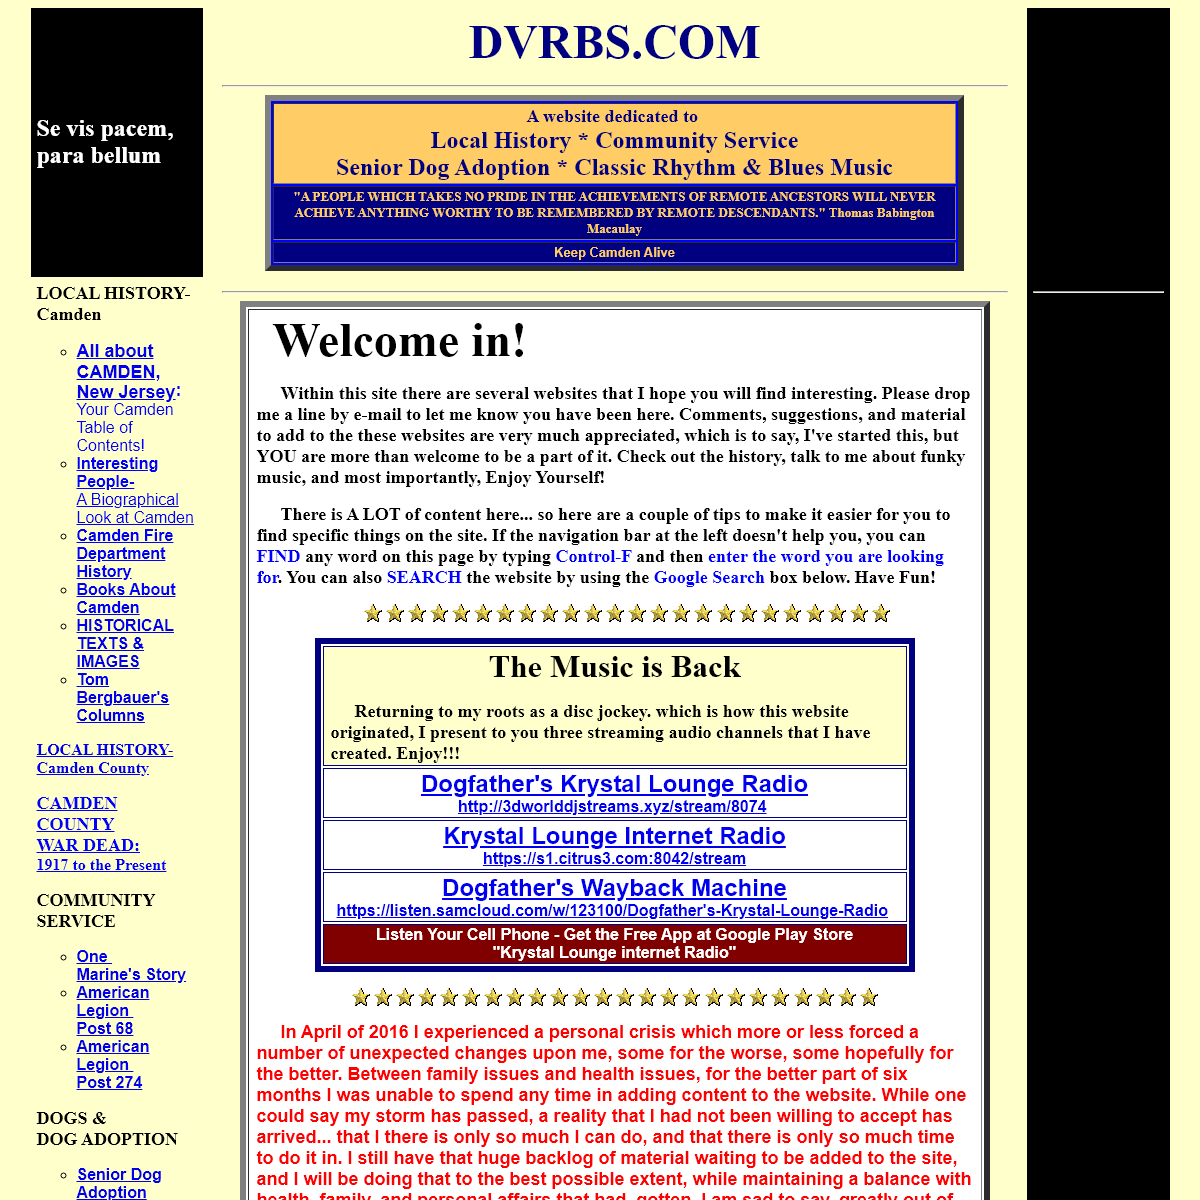 A complete backup of dvrbs.com